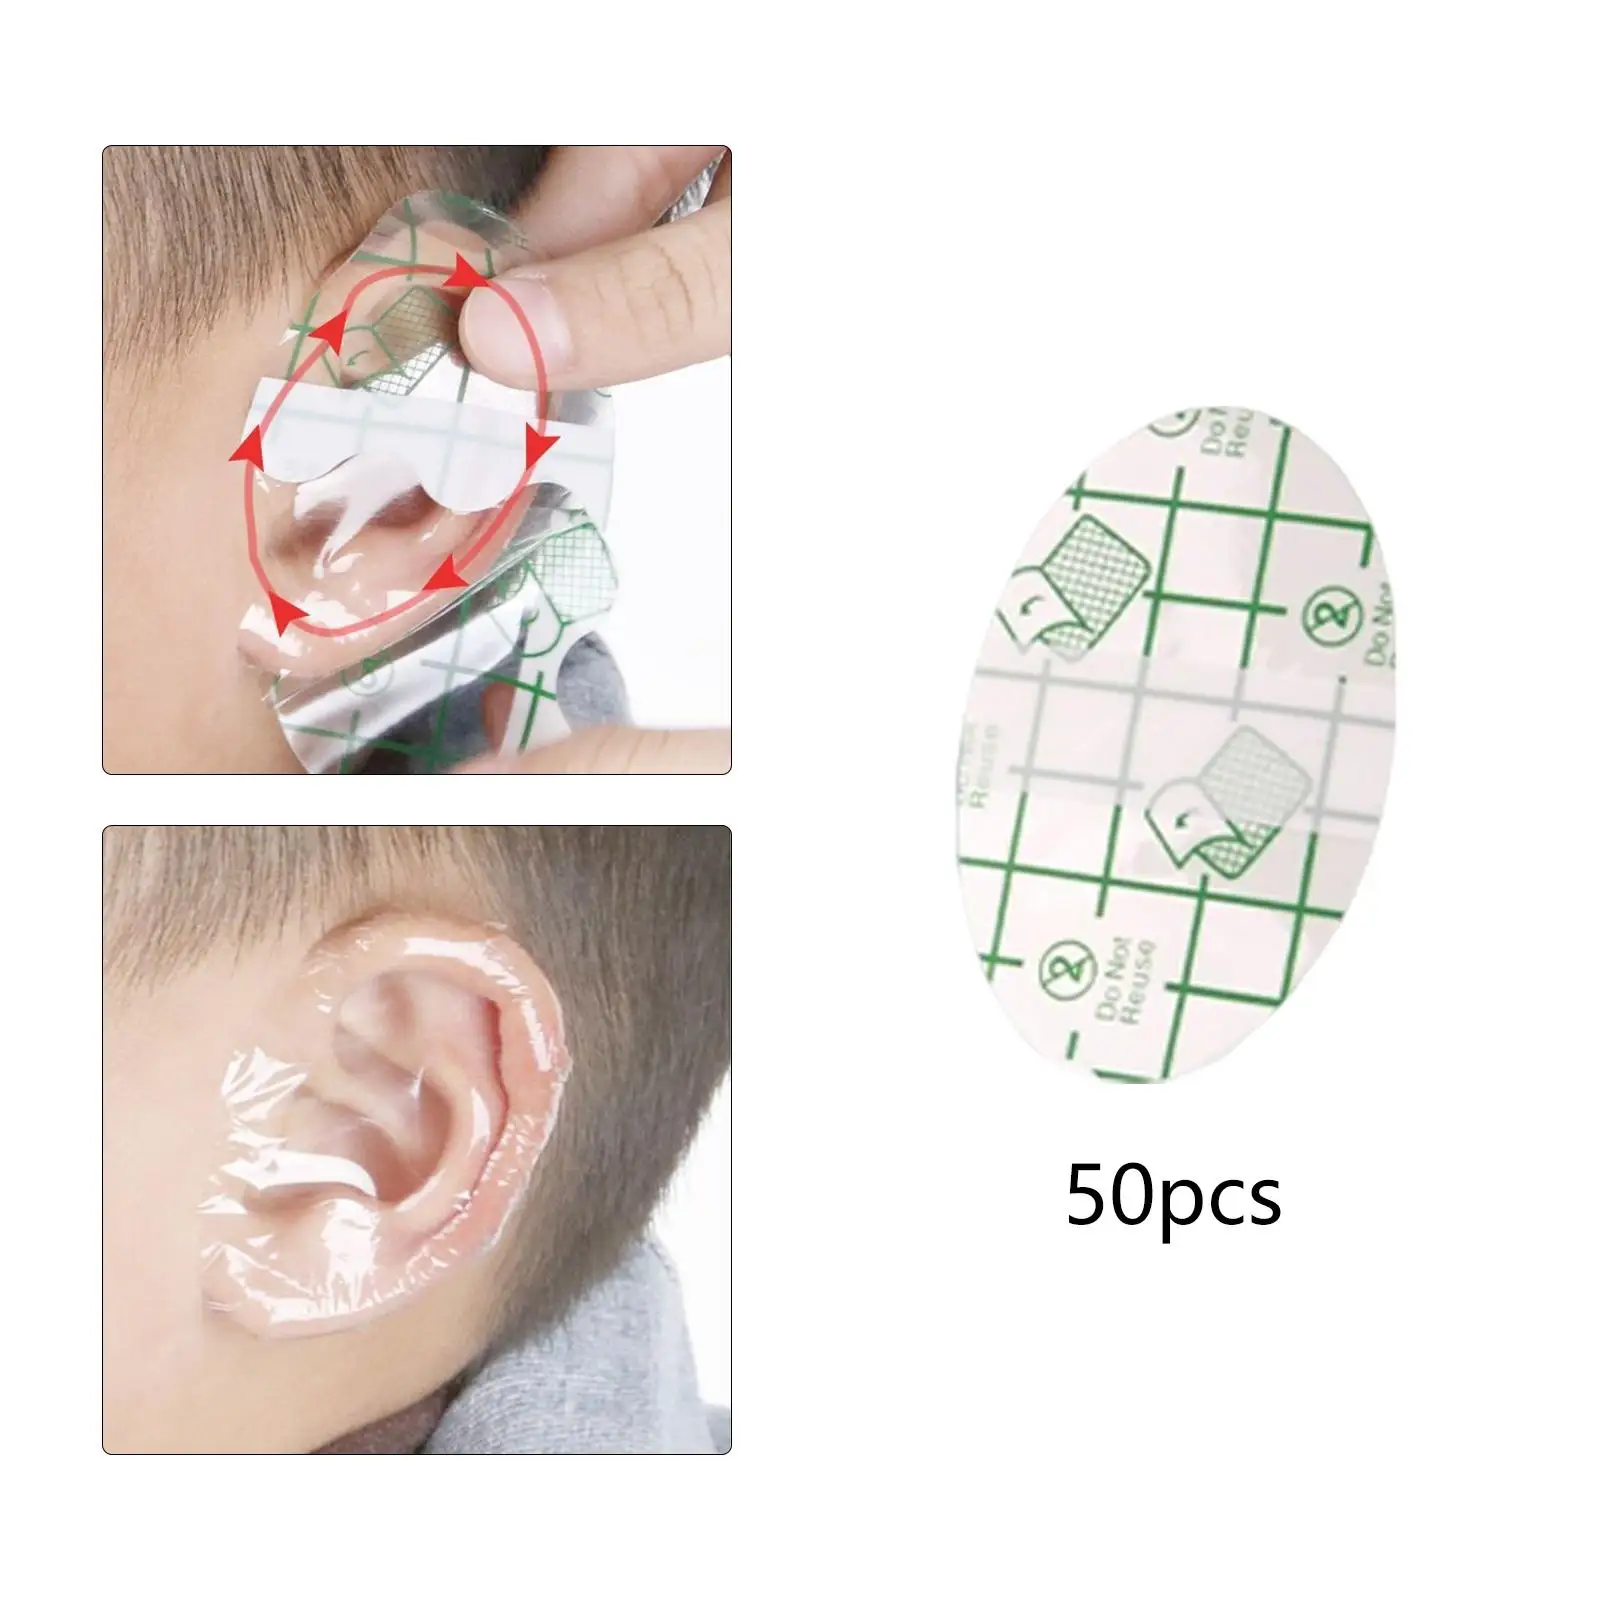 50Pcs Baby Waterproof Ear Covers Disposable Ear Protectors Ear Stickers for Shower Swimming Water Sports Kids Newborn